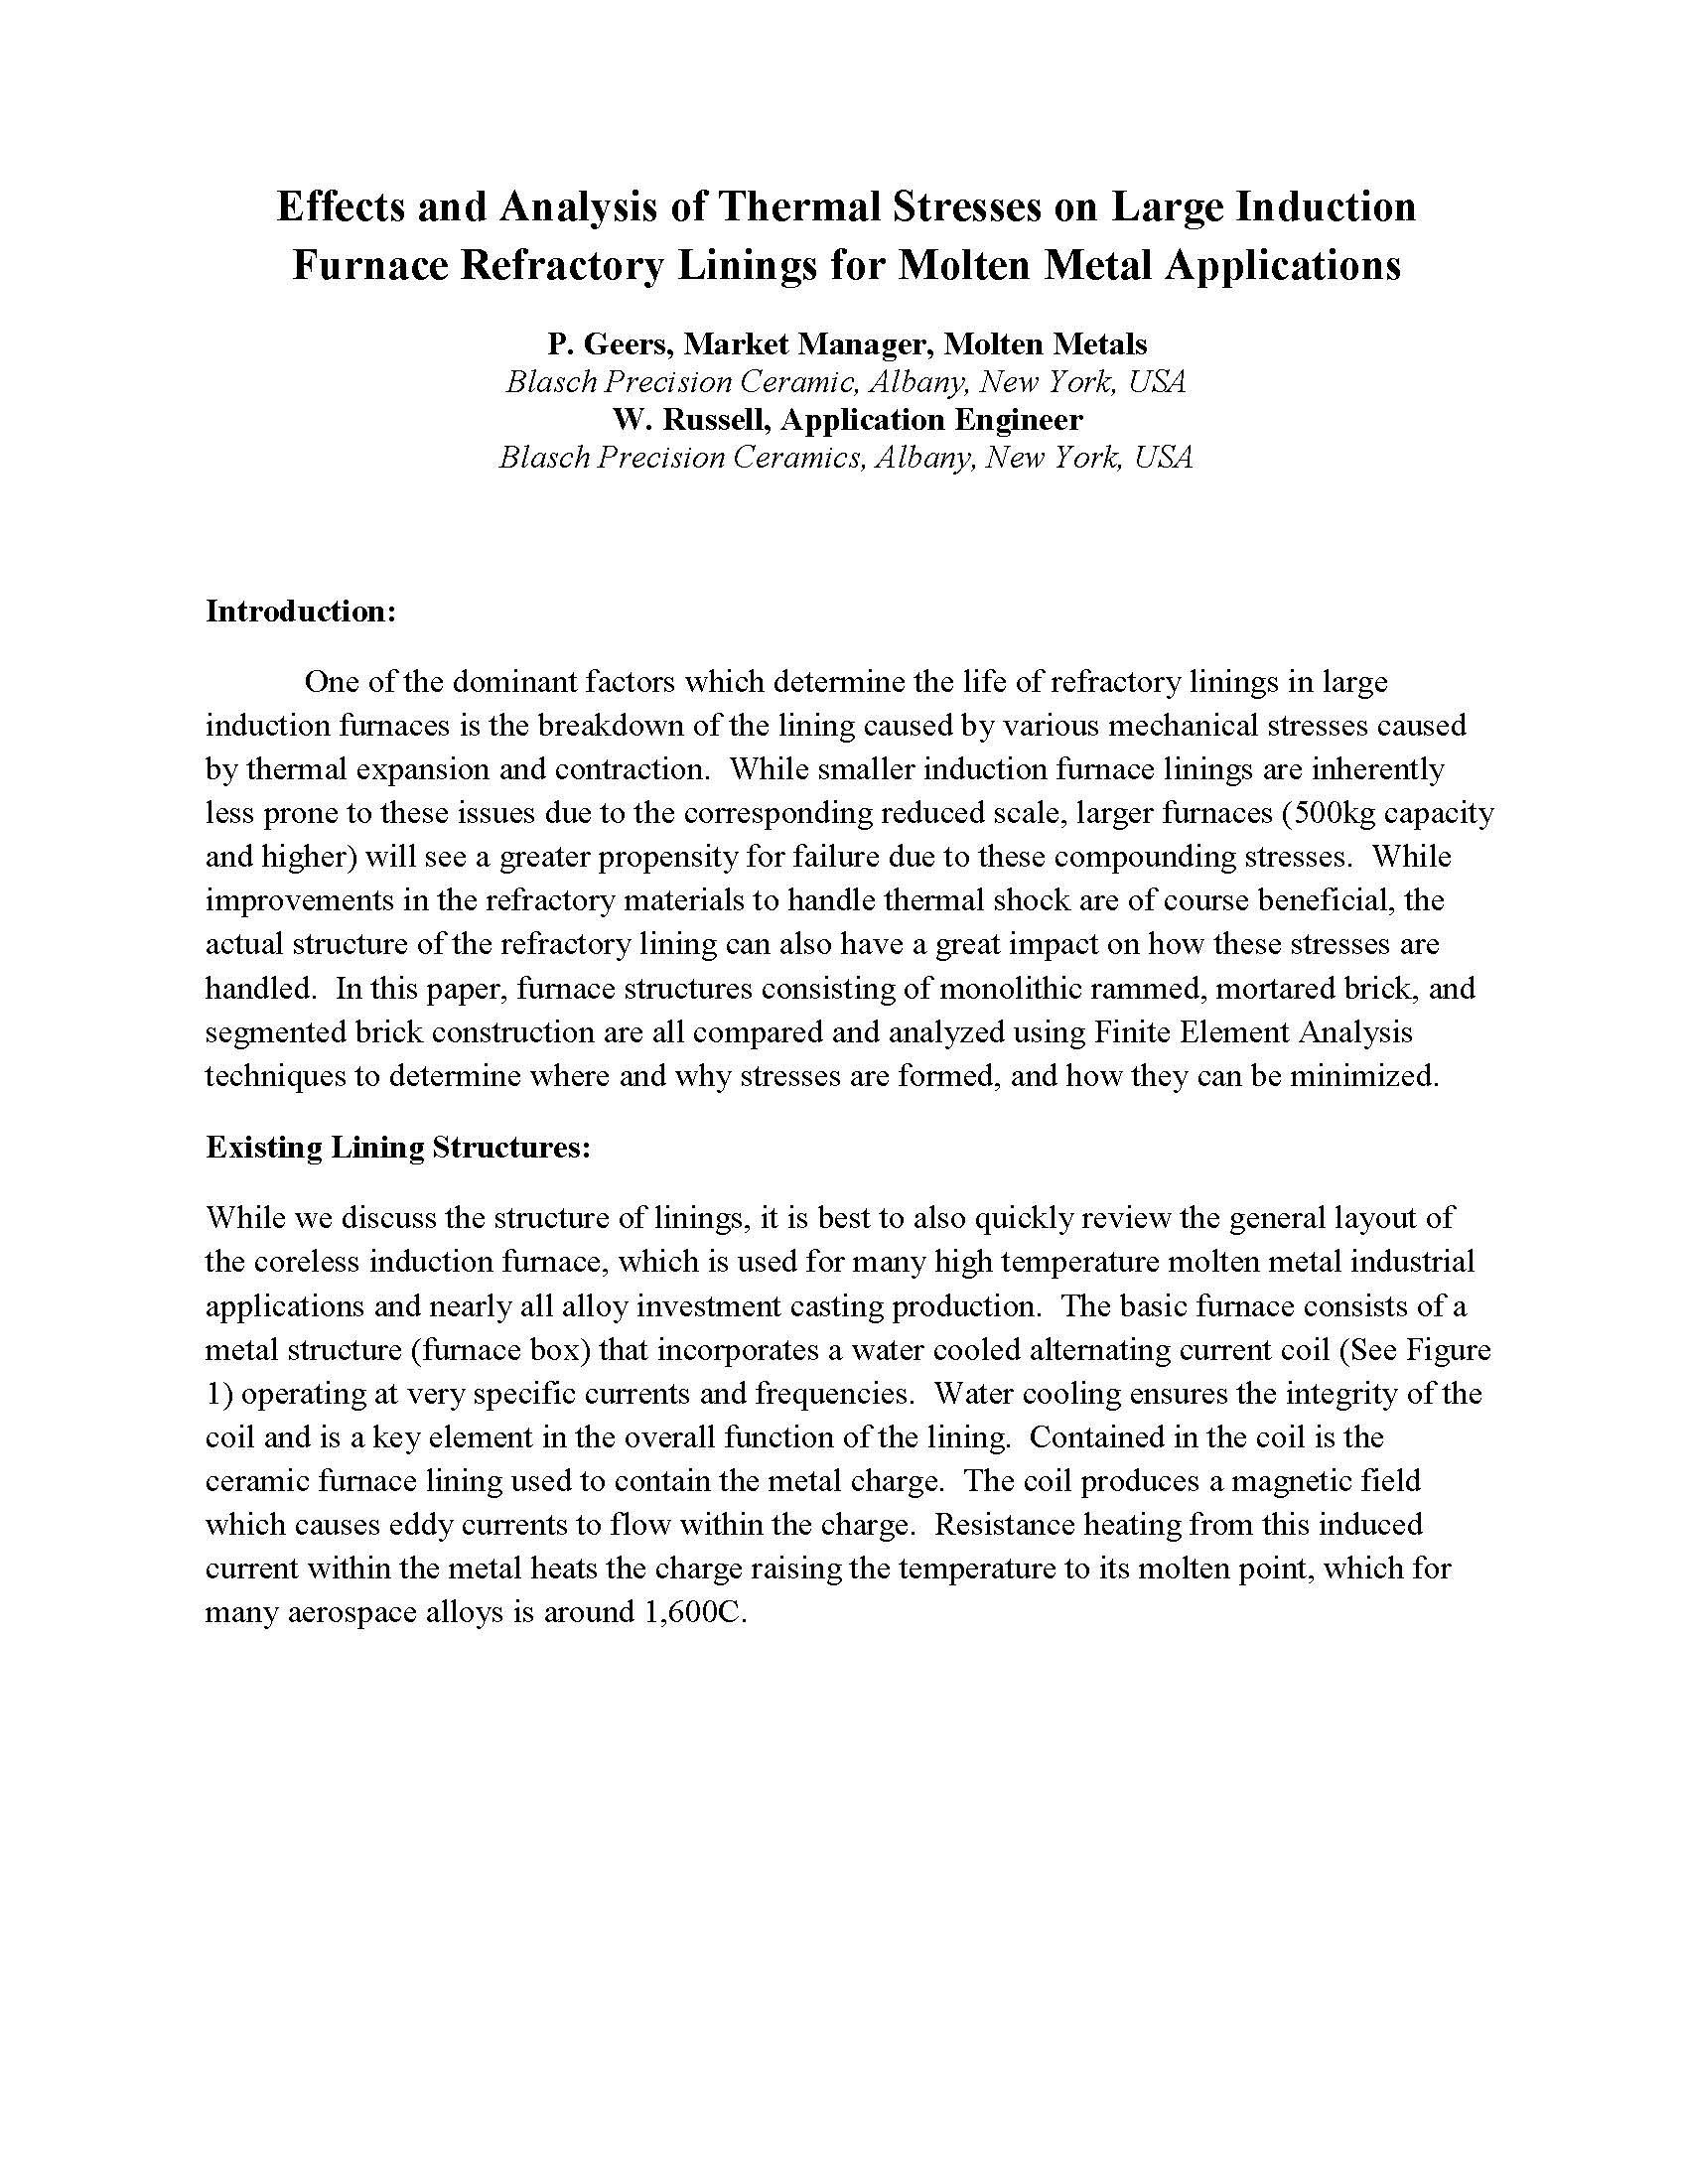 First page of "Effects and Analysis of Thermal Stresses on Large Induction Furnace Refractory Linings for Molten Metal Applications" white paper.